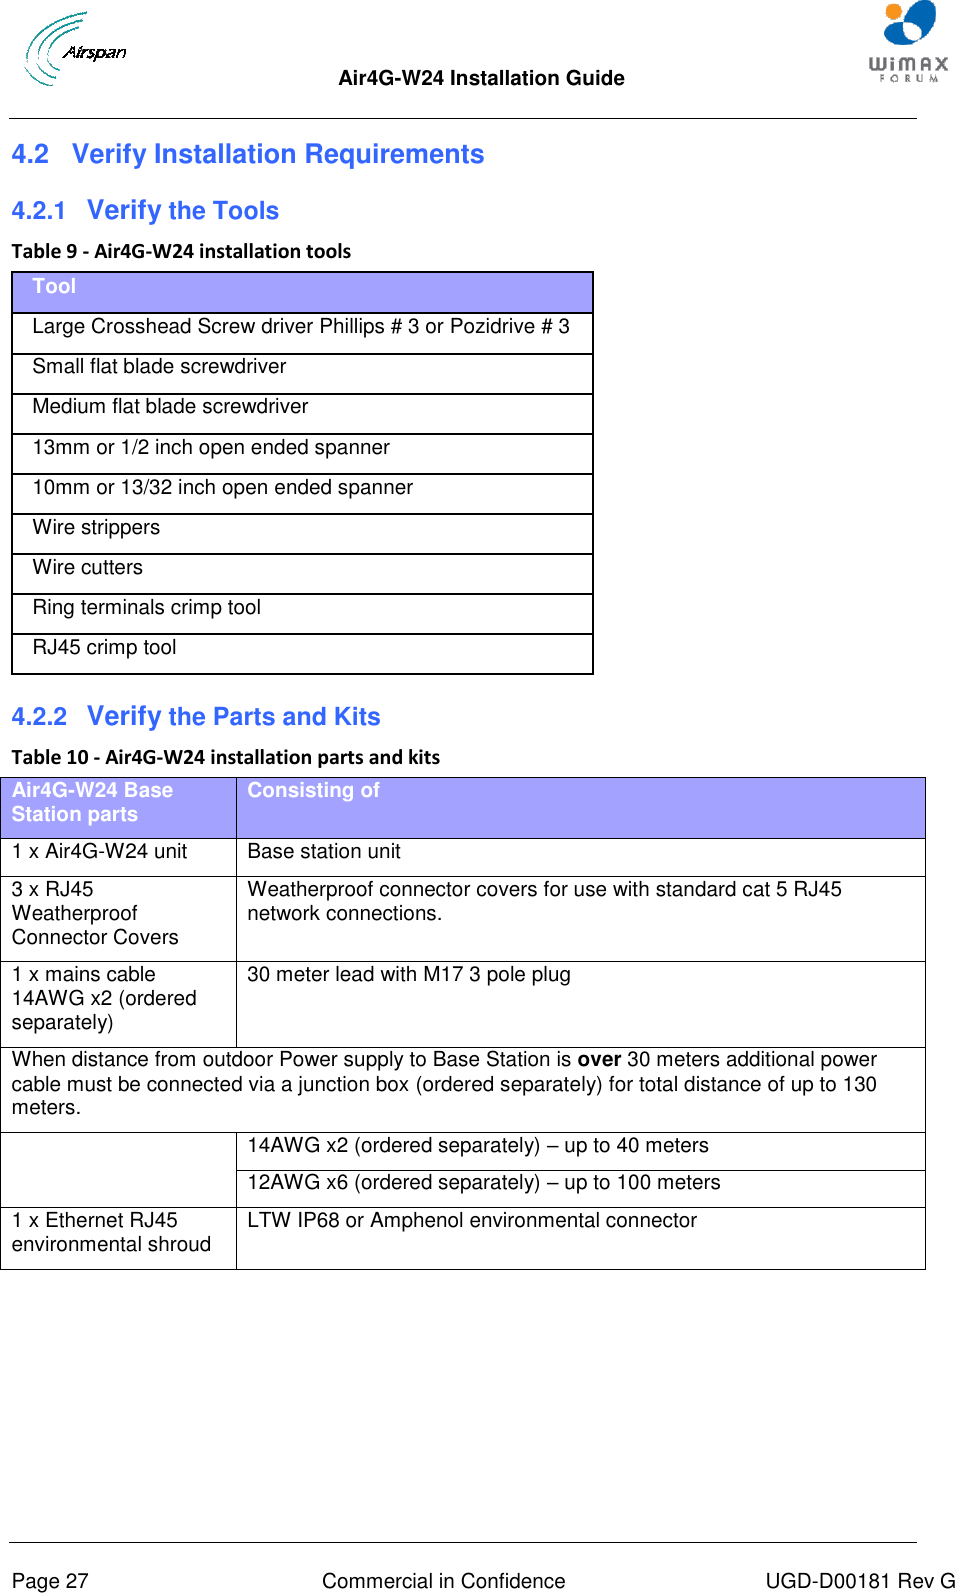  Air4G-W24 Installation Guide       Page 27  Commercial in Confidence  UGD-D00181 Rev G 4.2  Verify Installation Requirements 4.2.1  Verify the Tools Table 9 - Air4G-W24 installation tools Tool Large Crosshead Screw driver Phillips # 3 or Pozidrive # 3 Small flat blade screwdriver Medium flat blade screwdriver 13mm or 1/2 inch open ended spanner 10mm or 13/32 inch open ended spanner Wire strippers Wire cutters Ring terminals crimp tool RJ45 crimp tool 4.2.2  Verify the Parts and Kits Table 10 - Air4G-W24 installation parts and kits Air4G-W24 Base Station parts Consisting of 1 x Air4G-W24 unit Base station unit 3 x RJ45 Weatherproof Connector Covers Weatherproof connector covers for use with standard cat 5 RJ45 network connections. 1 x mains cable 14AWG x2 (ordered separately) 30 meter lead with M17 3 pole plug When distance from outdoor Power supply to Base Station is over 30 meters additional power cable must be connected via a junction box (ordered separately) for total distance of up to 130 meters.  14AWG x2 (ordered separately) – up to 40 meters 12AWG x6 (ordered separately) – up to 100 meters 1 x Ethernet RJ45 environmental shroud LTW IP68 or Amphenol environmental connector 